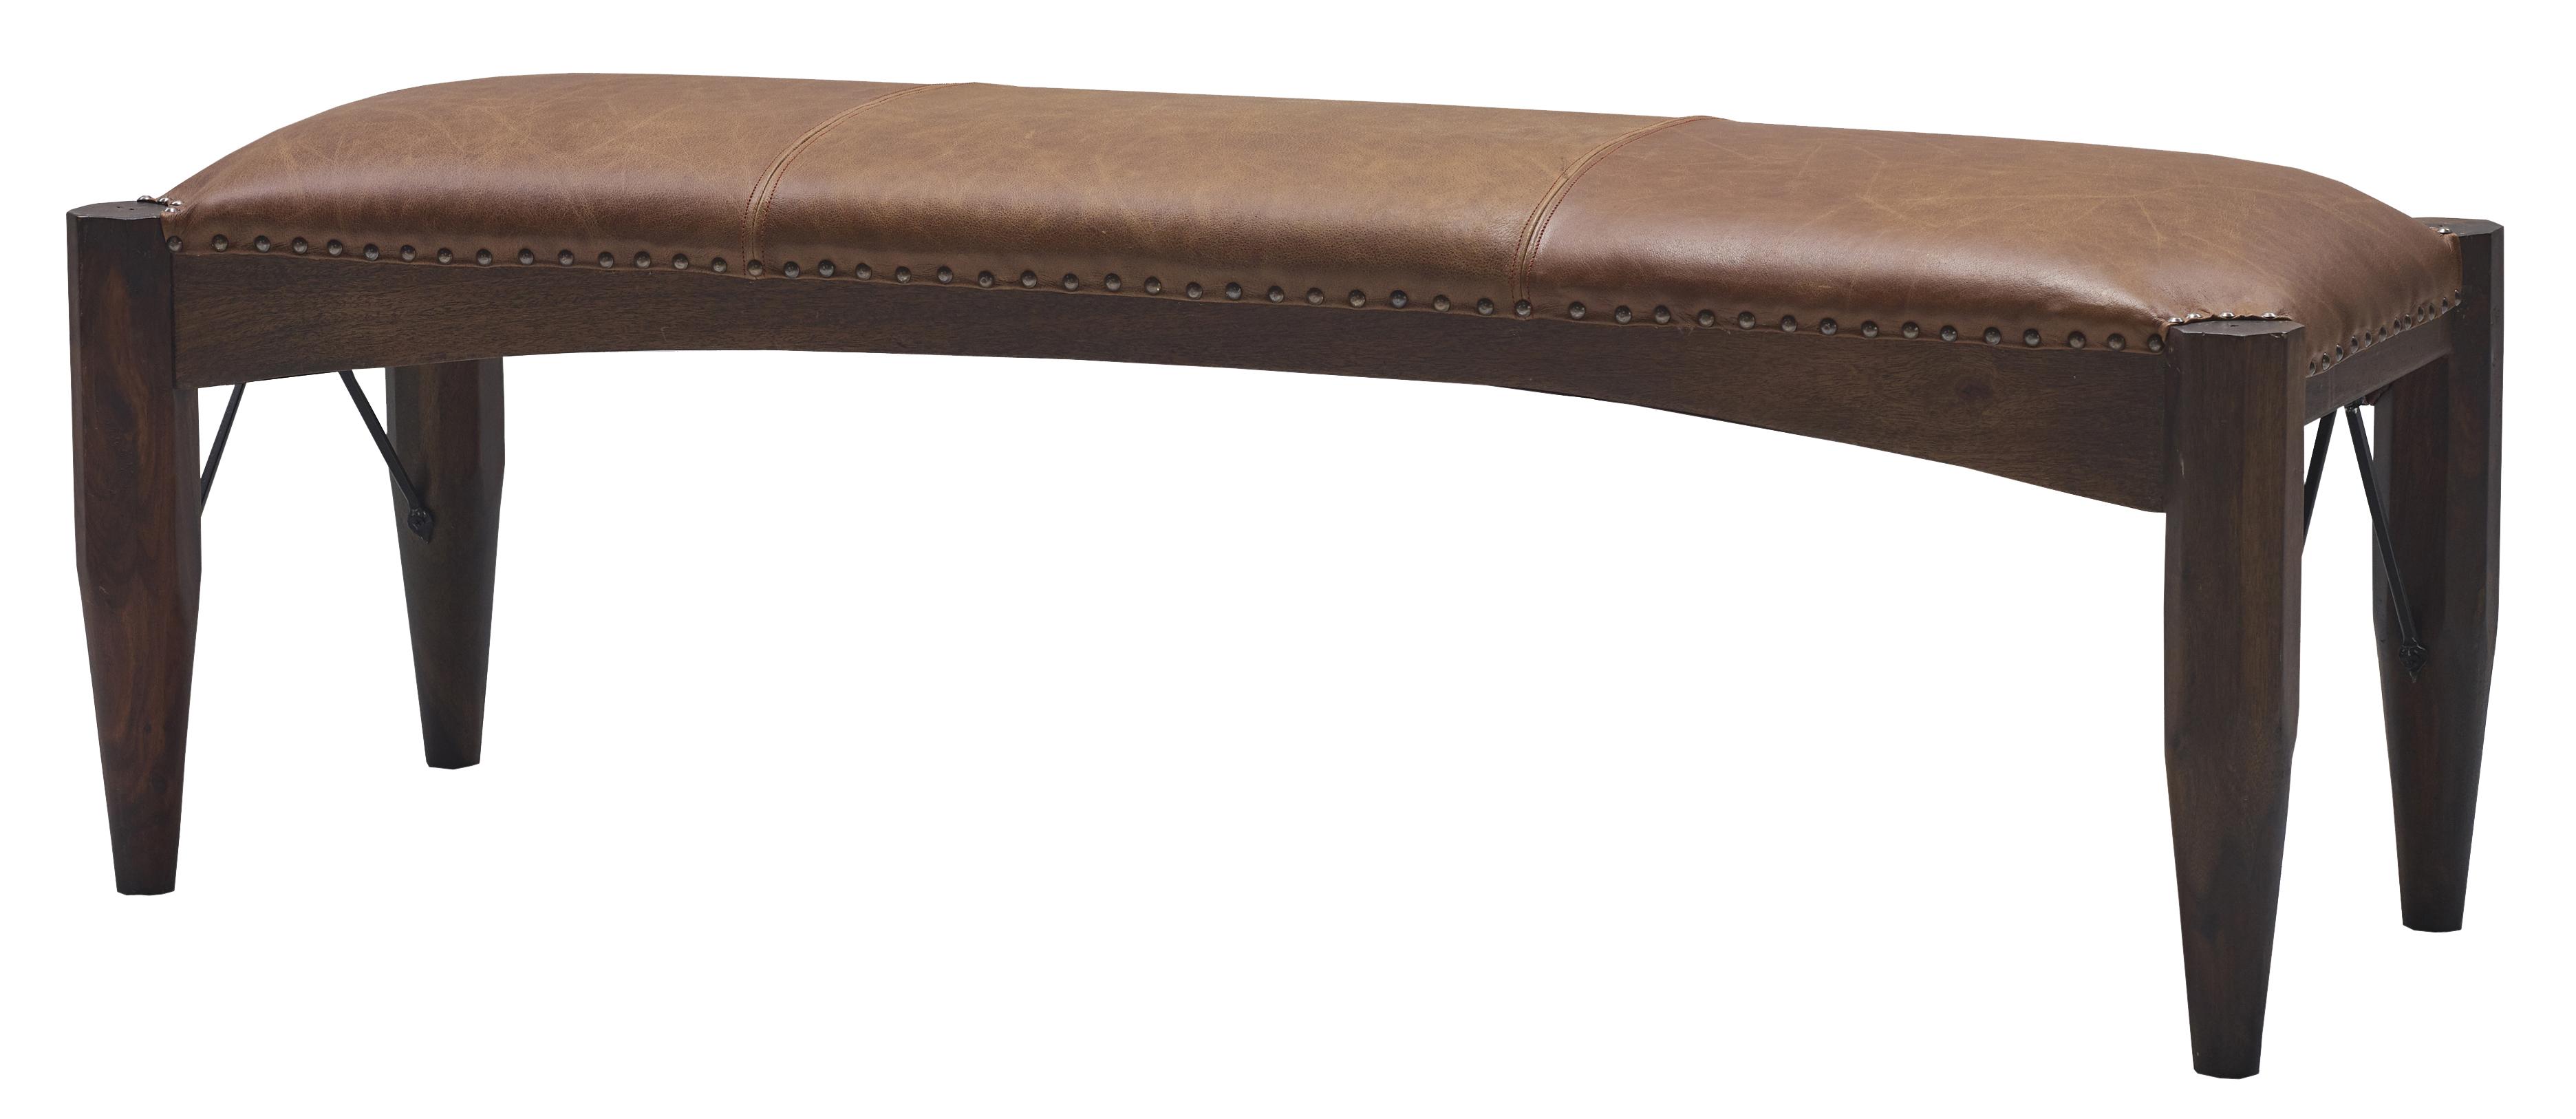 Transitional Bench CAC-59001 Harger CAC-59001 in Walnut Leather